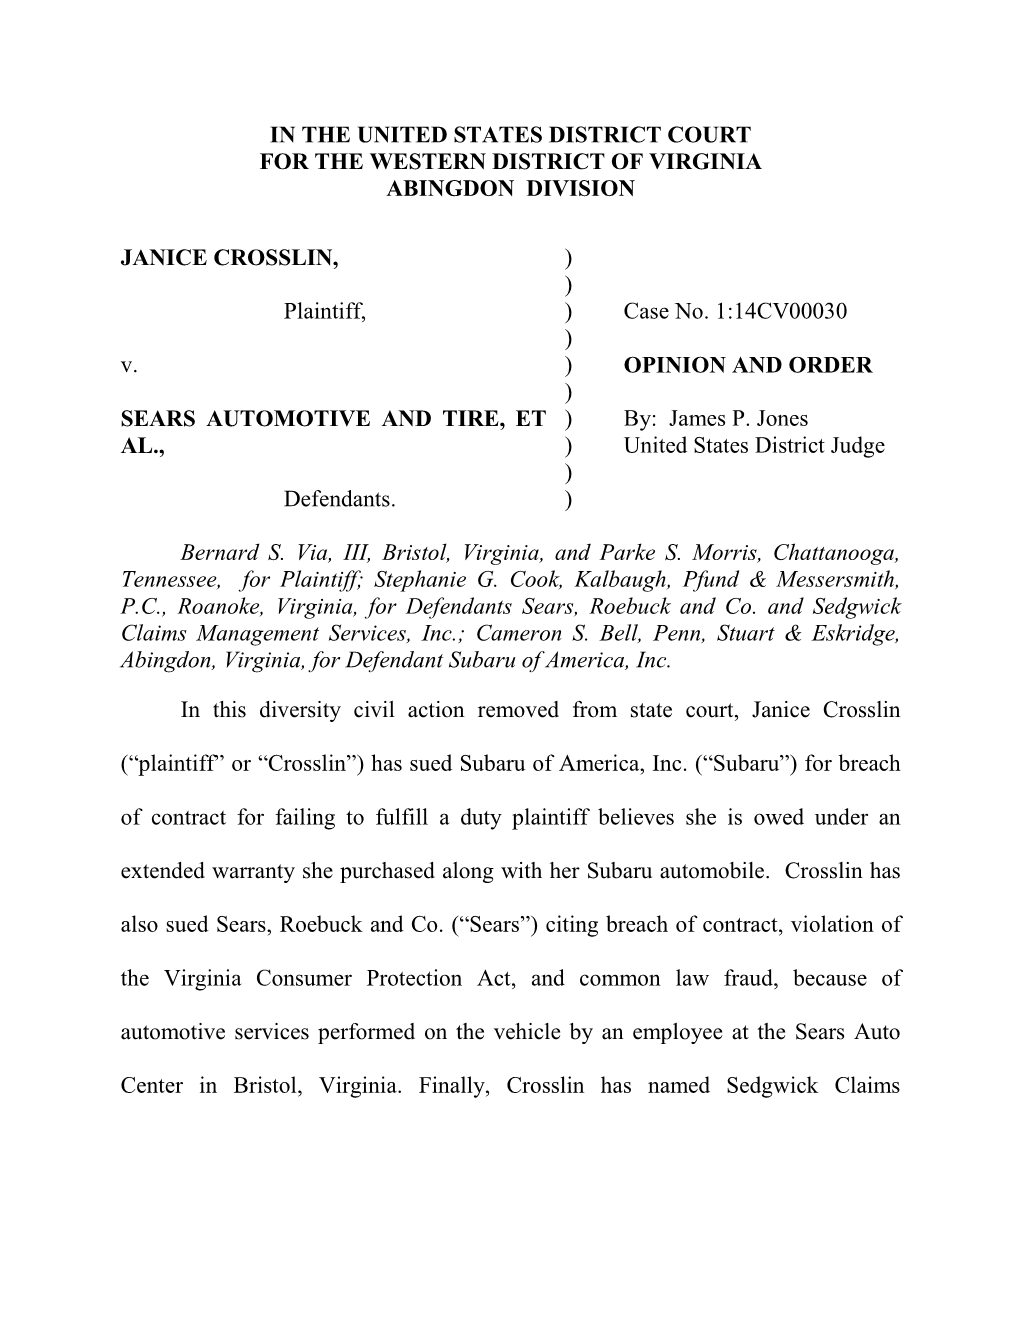 IN the UNITED STATES DISTRICT COURT for the WESTERN DISTRICT of VIRGINIA ABINGDON DIVISION JANICE CROSSLIN, ) ) Plaintiff, )